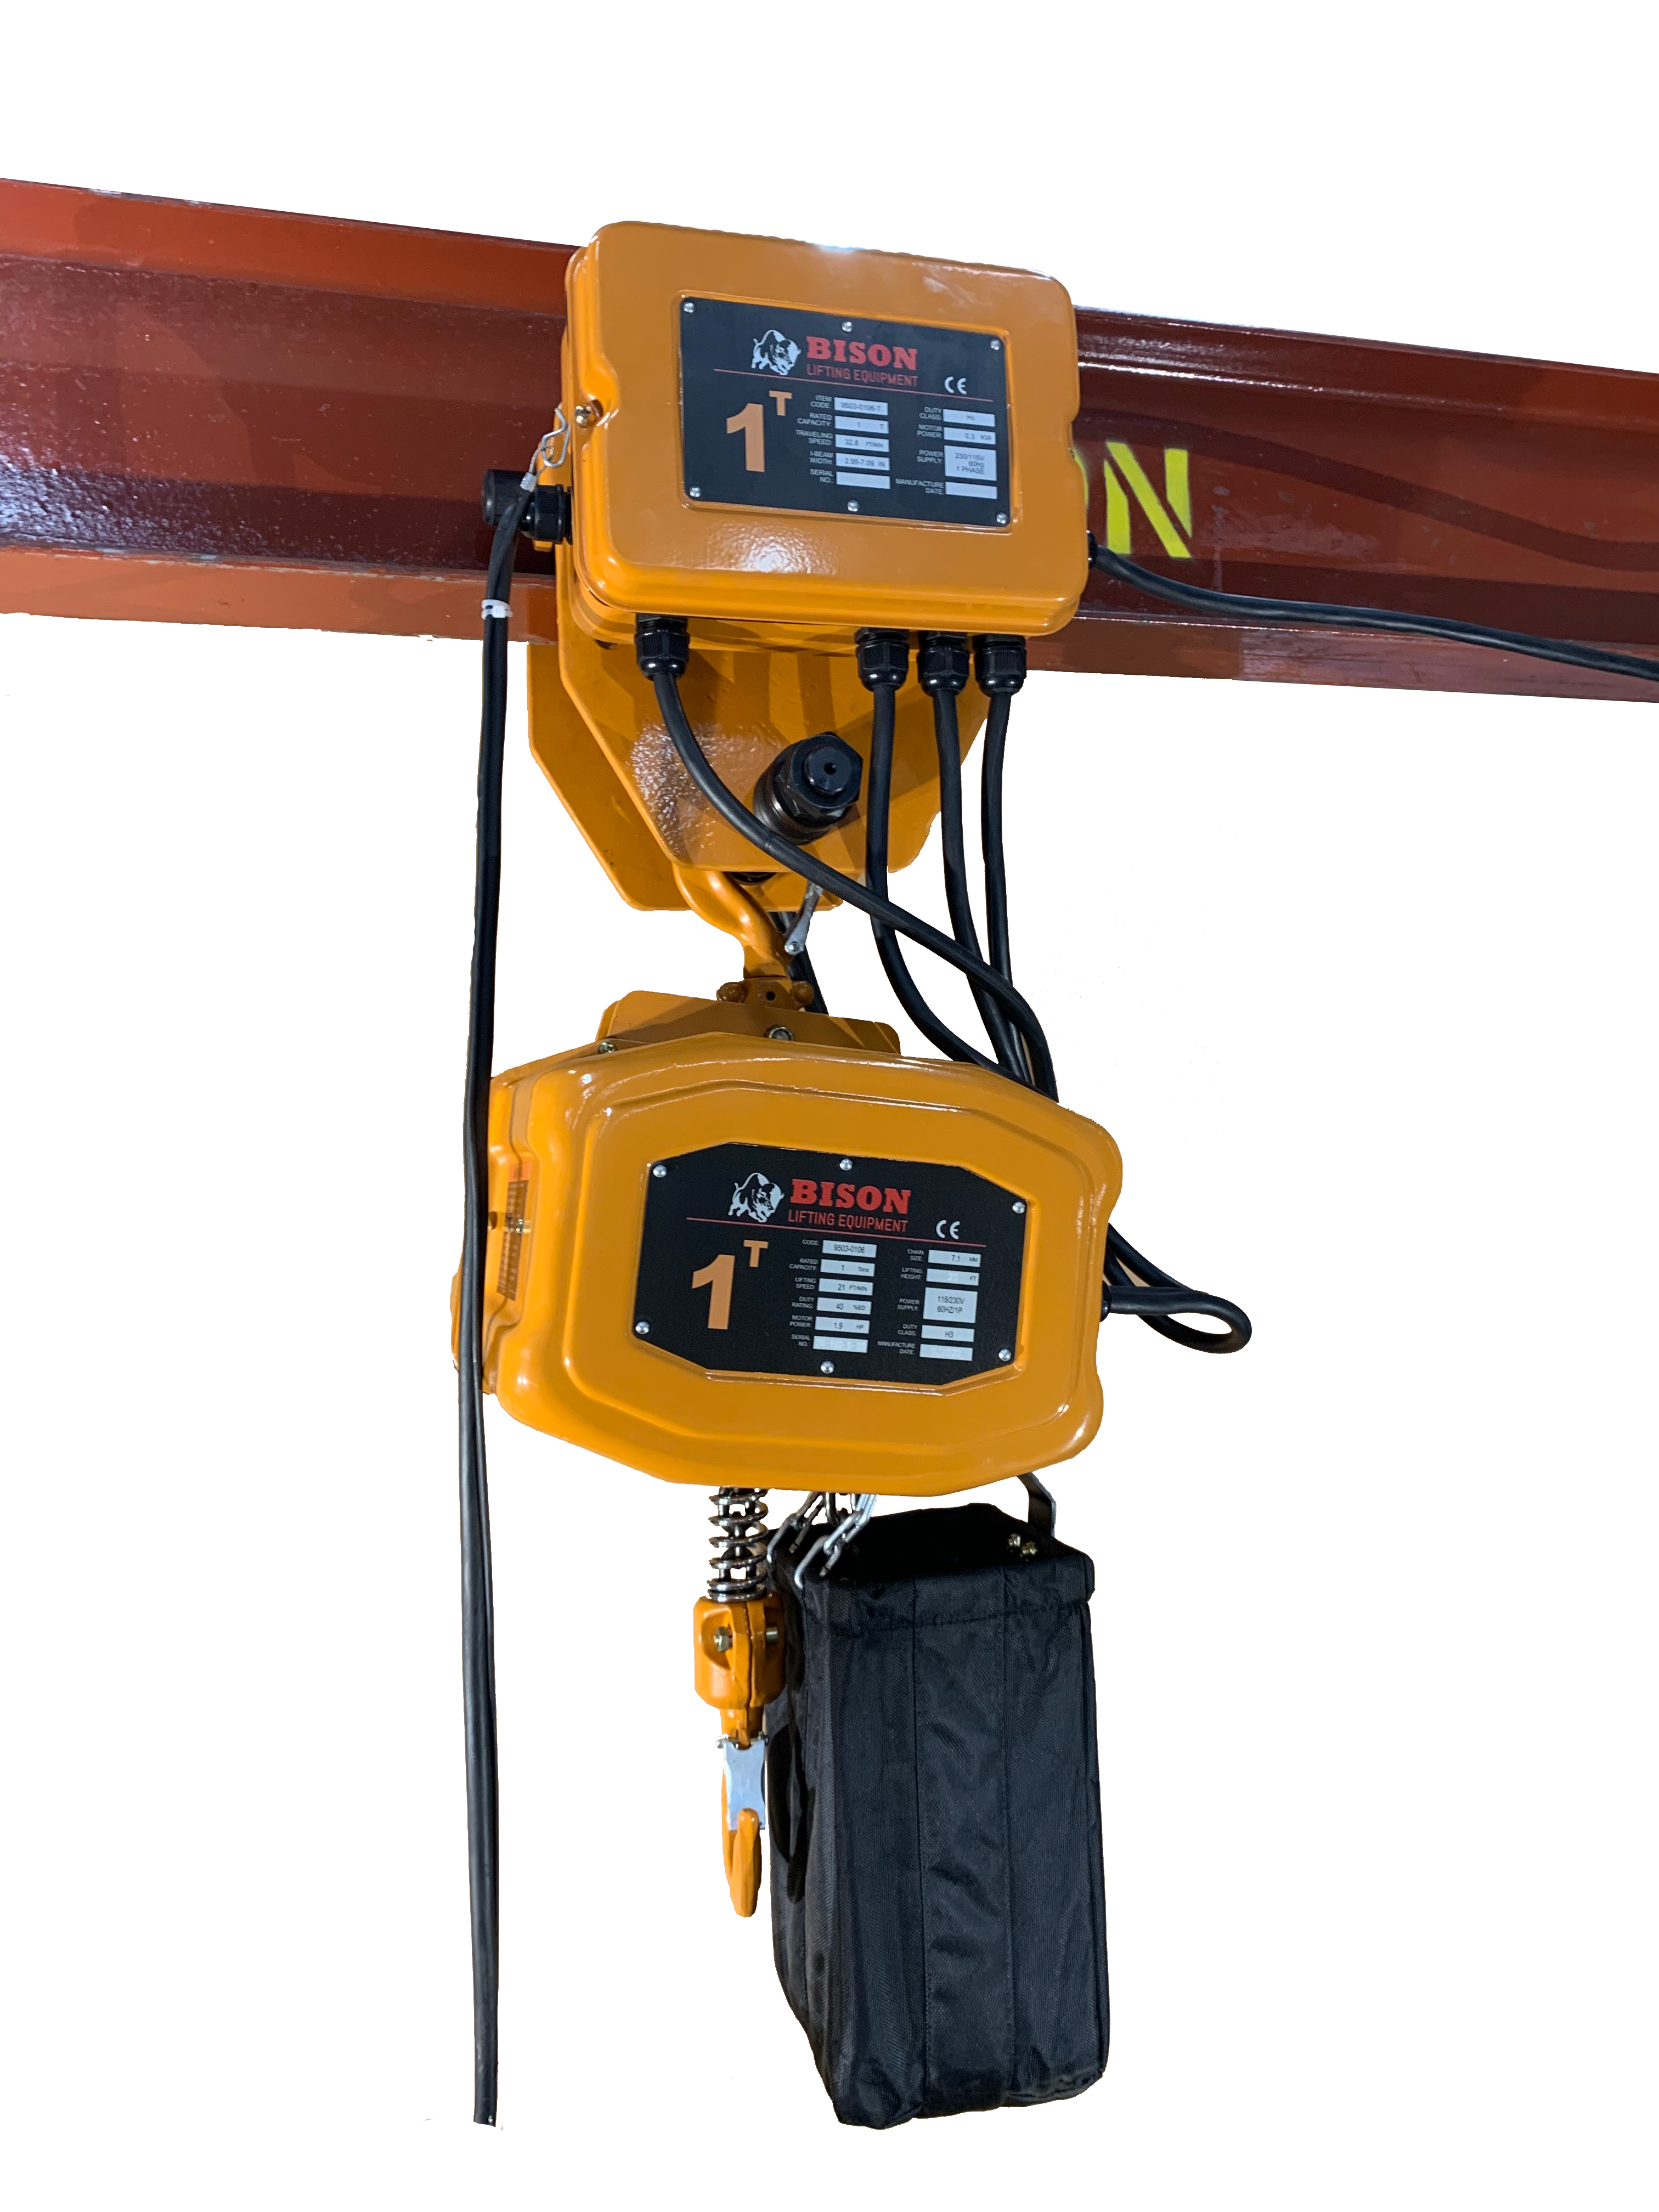 Bison 5Ton Single Phase Electric Chain Hoist with Motorized Trolley 115v/230v